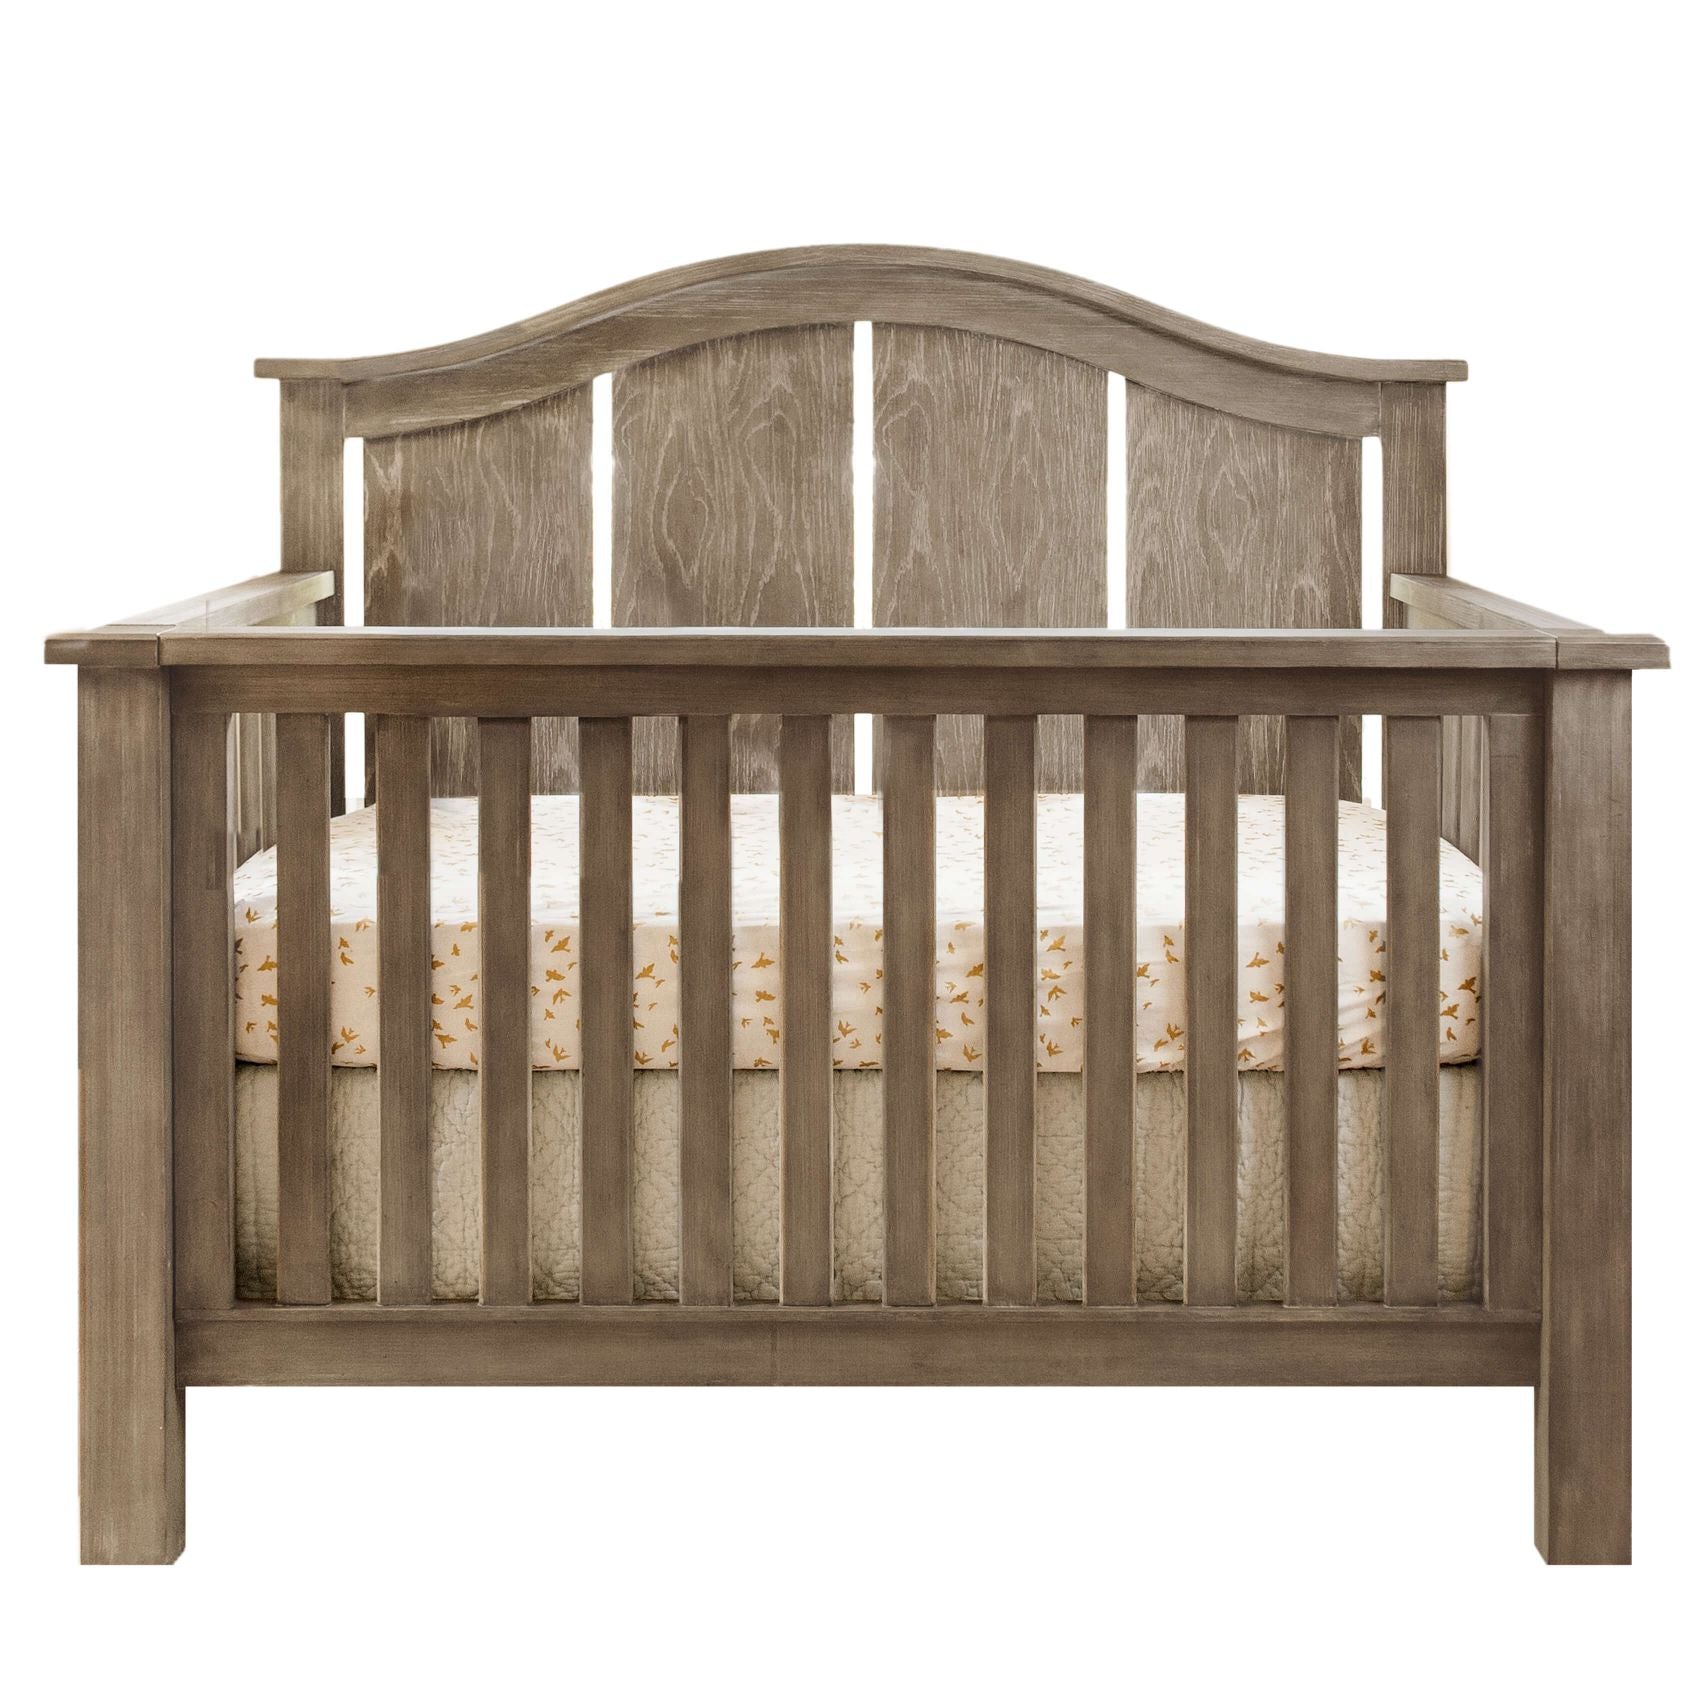 Shop the trend-setting rustic farmhouse crib from the RELIC collection by Milk Street Baby.